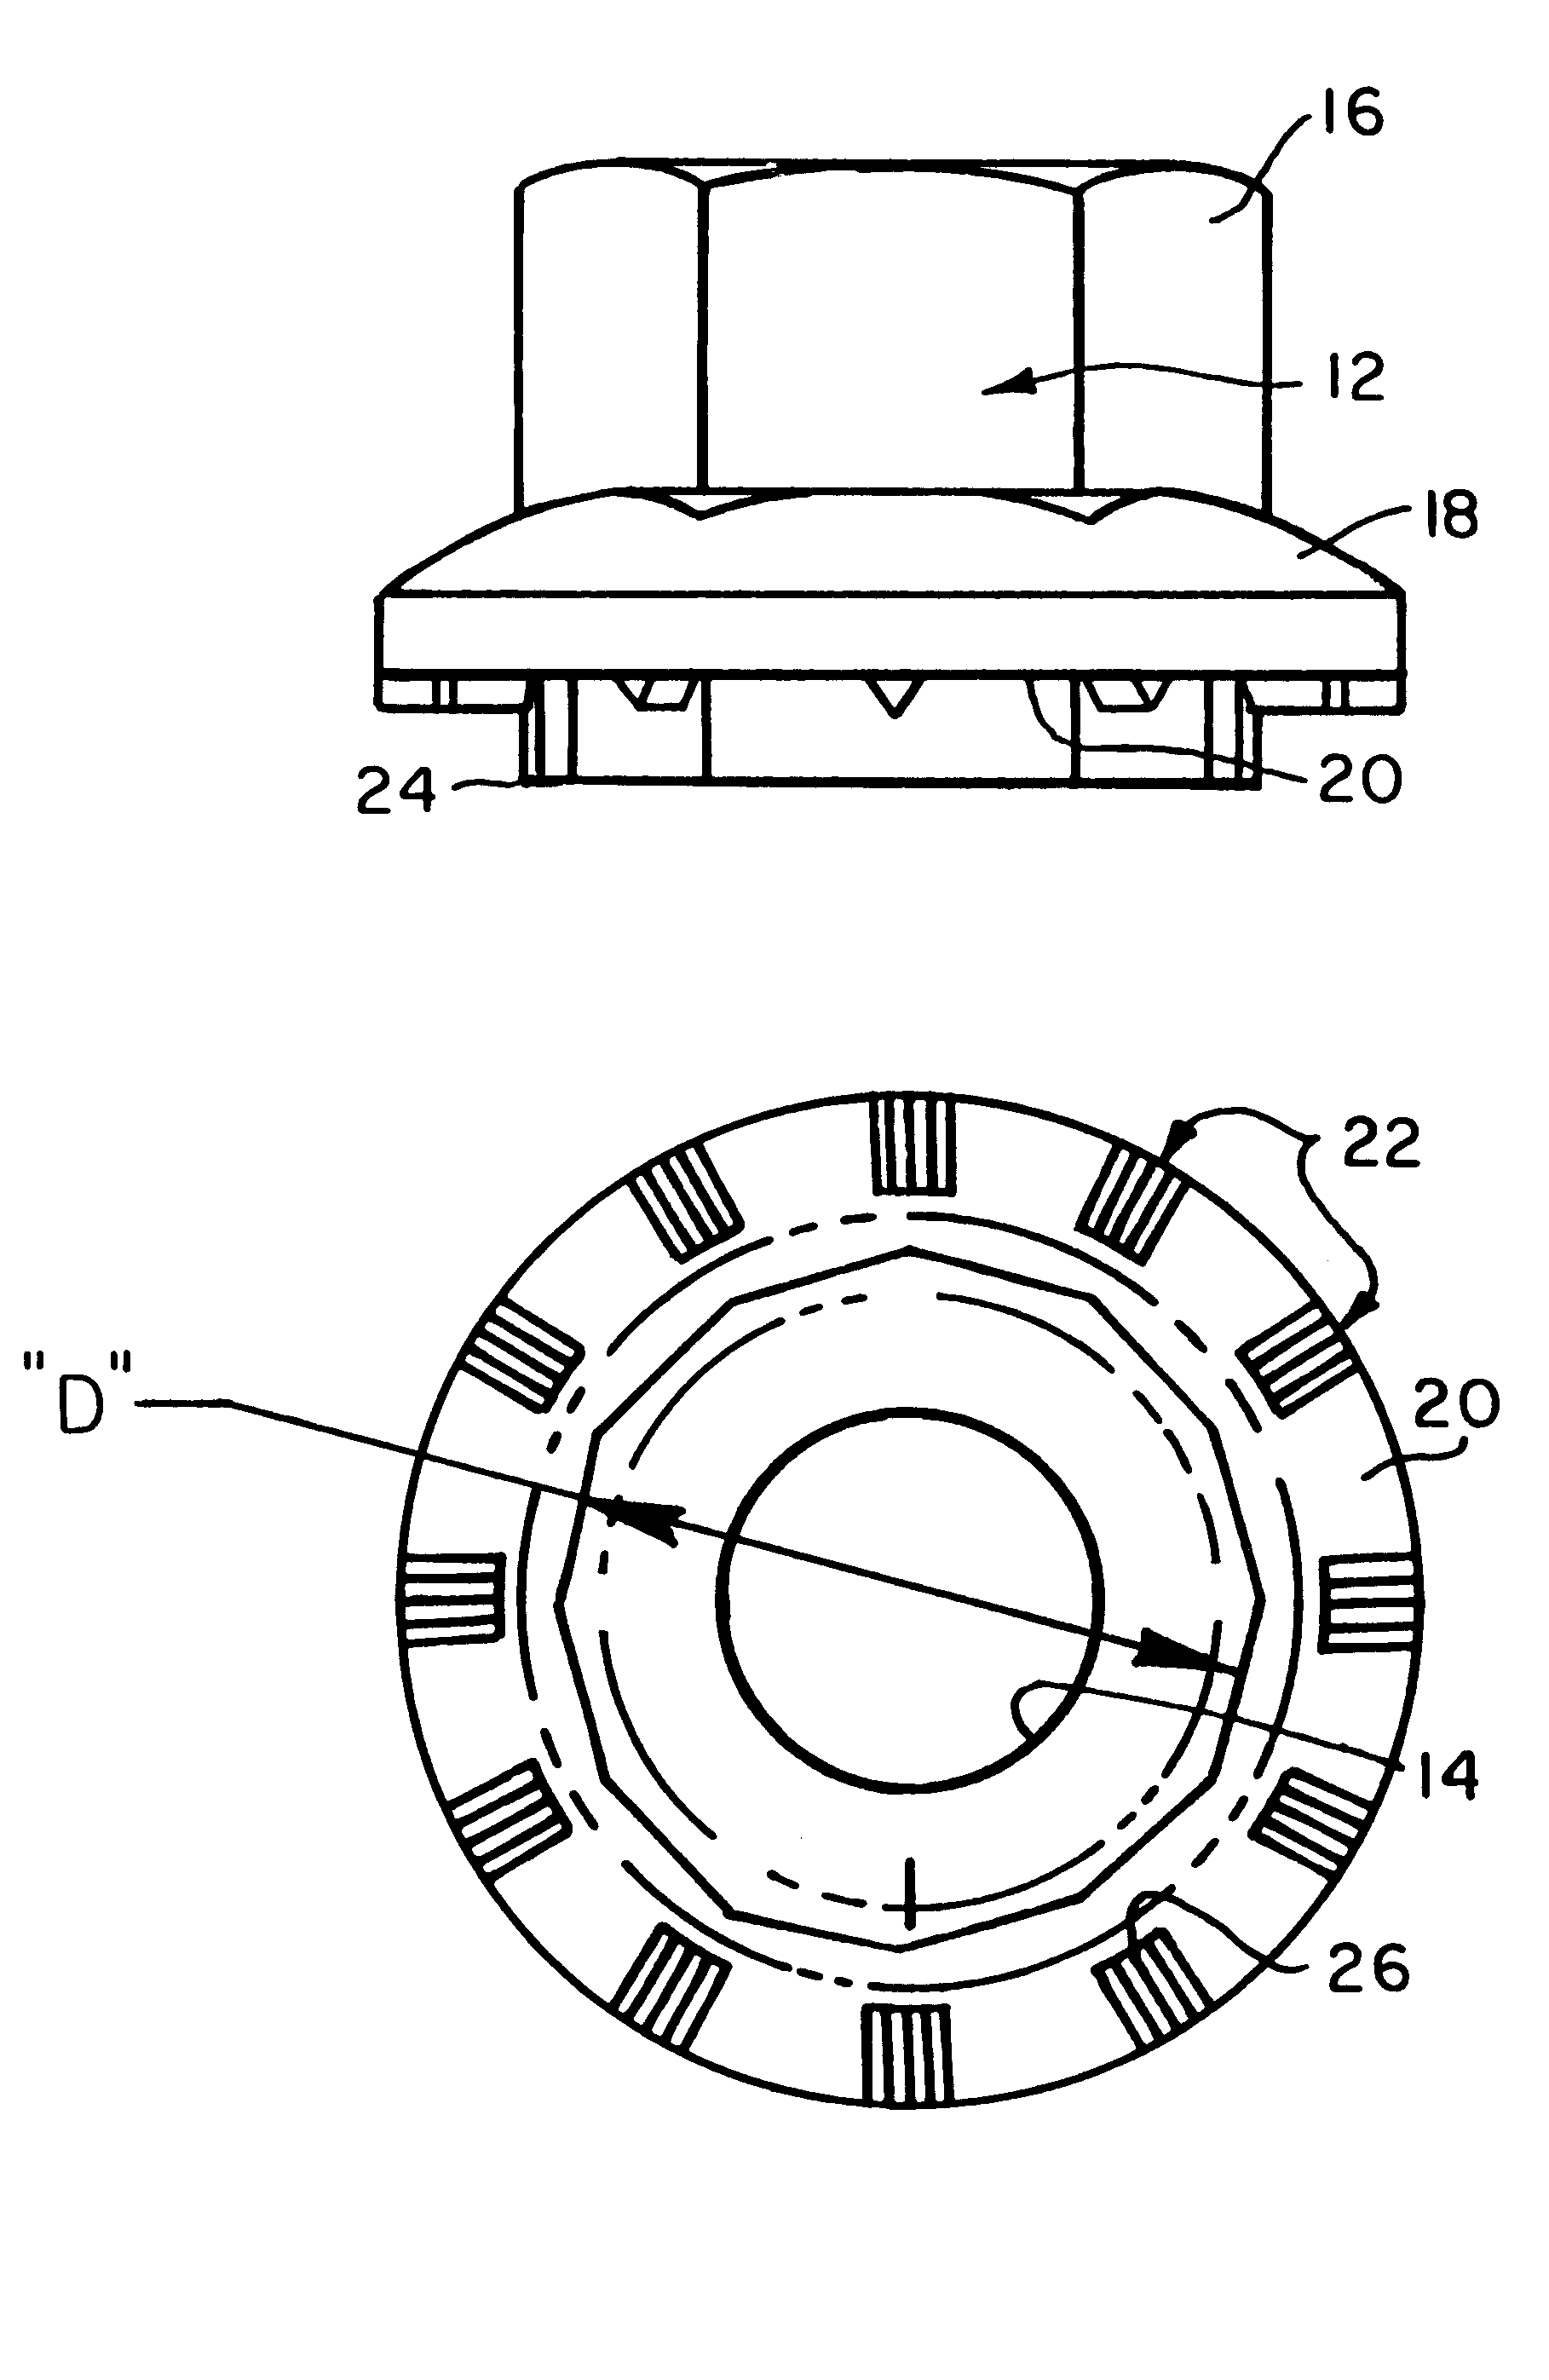 Fastener for self-locking securement within a panel opening